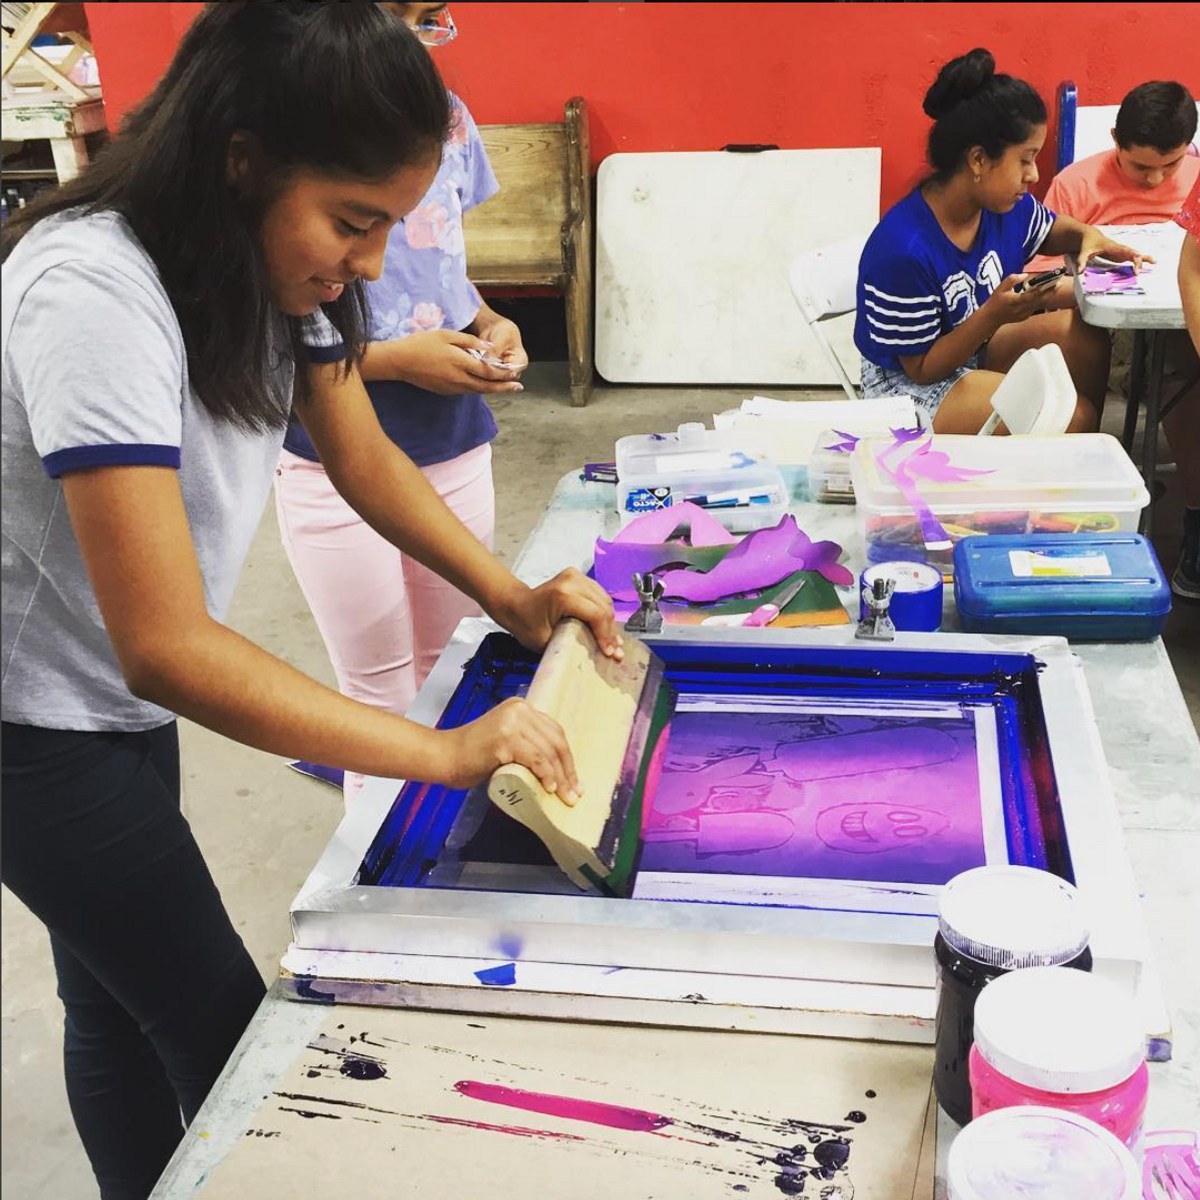 Students from the Heart of Los Angeles after-school programme learn to make prints at Self Help Graphics & Art

Courtesy Self Help Graphics & Art